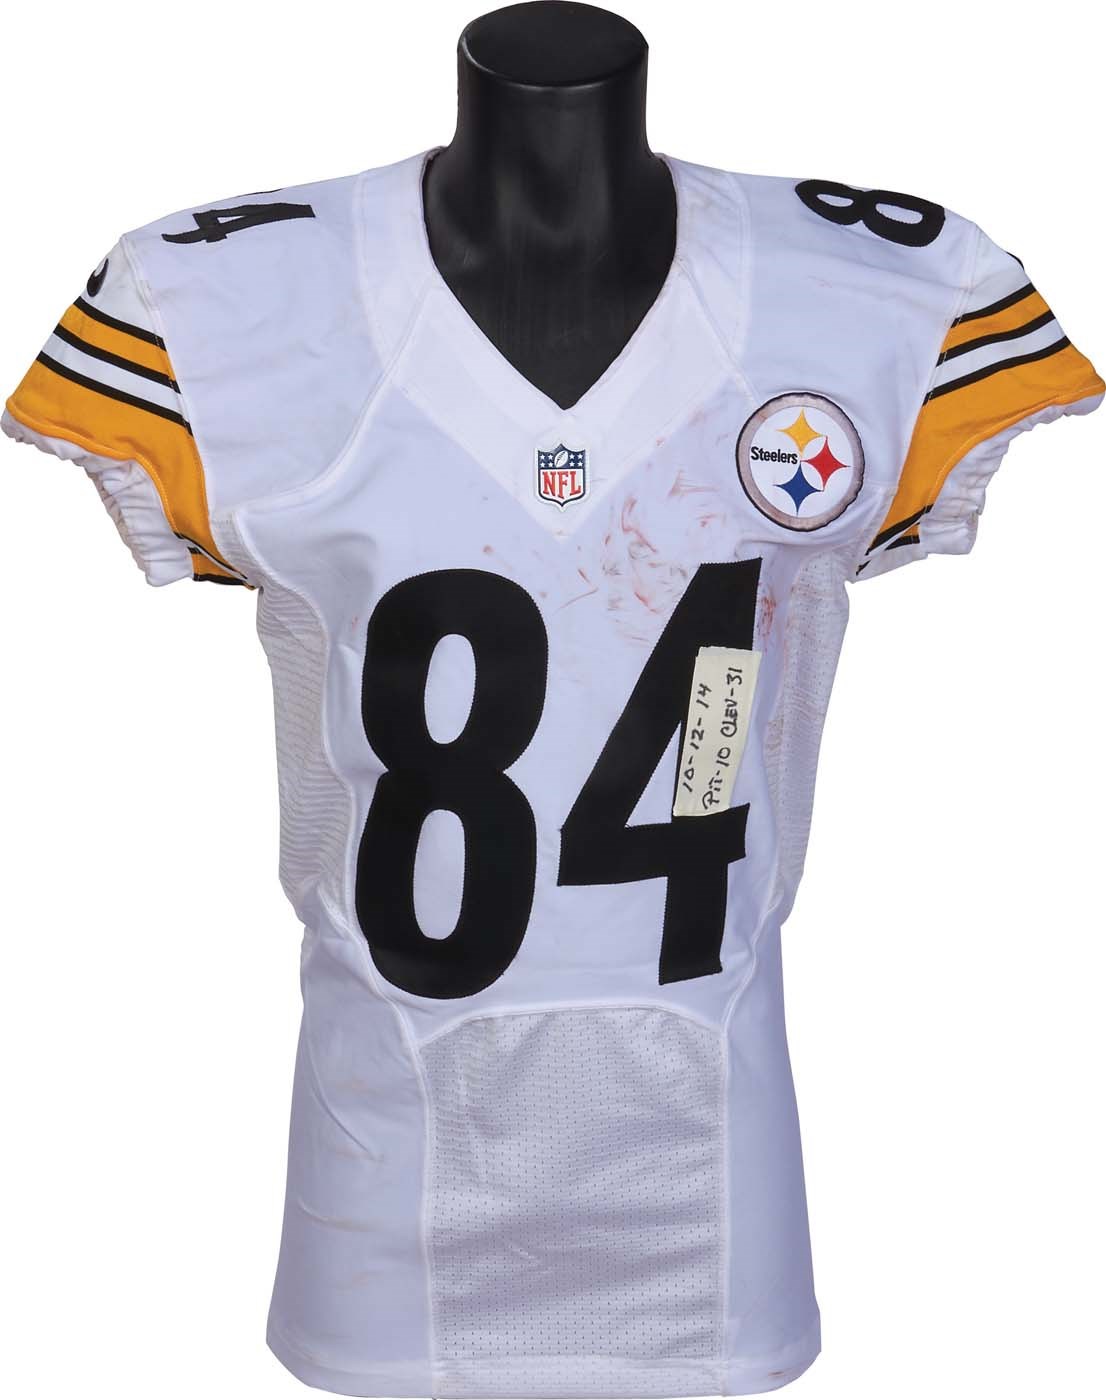 October 12th, 2014 Antonio Brown Pittsburgh Steelers Game Worn Jersey PSA (Photo-Matched)